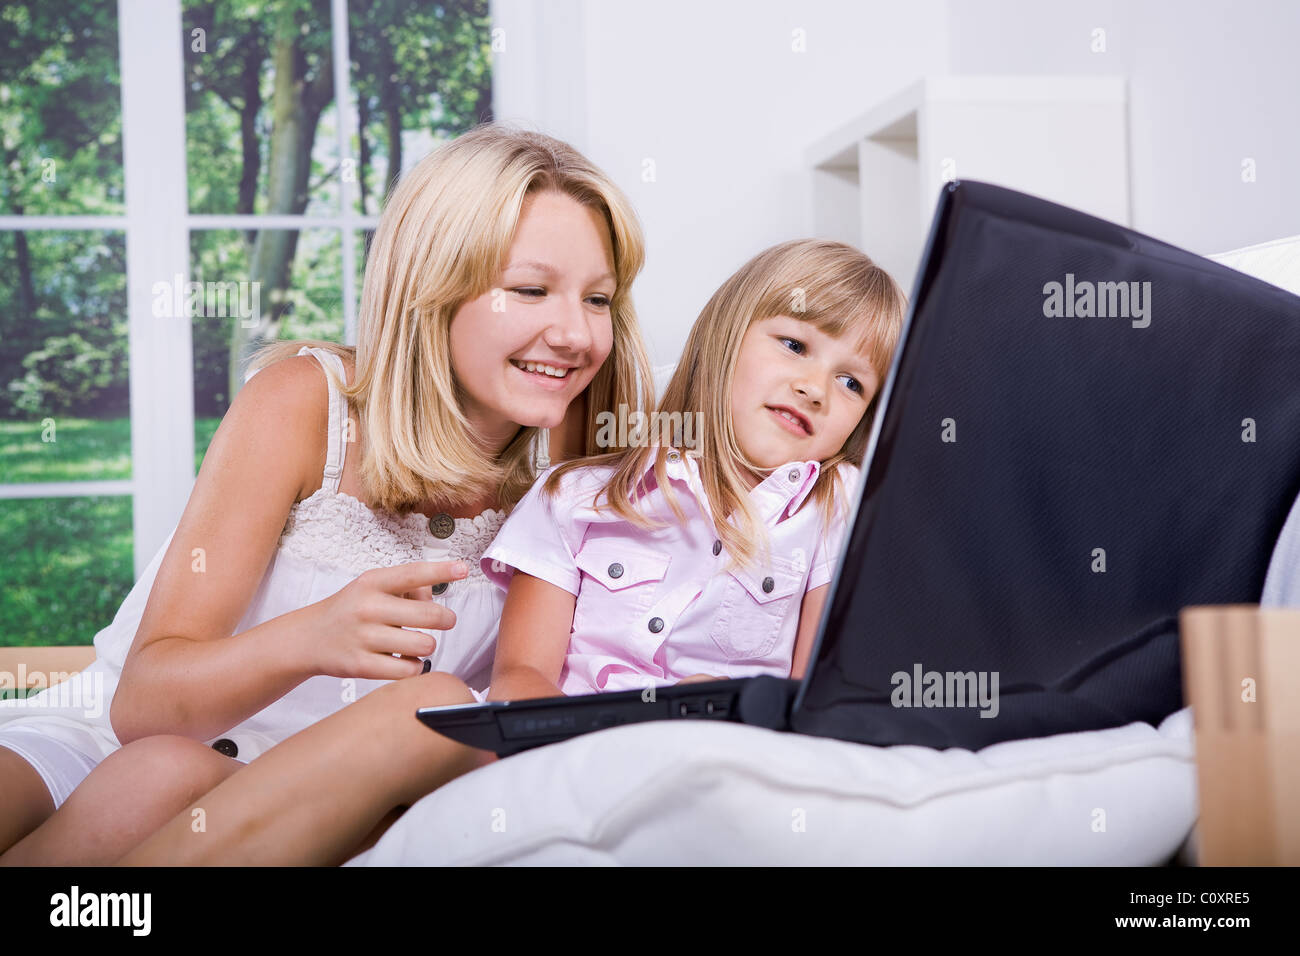 girls with laptop Stock Photo